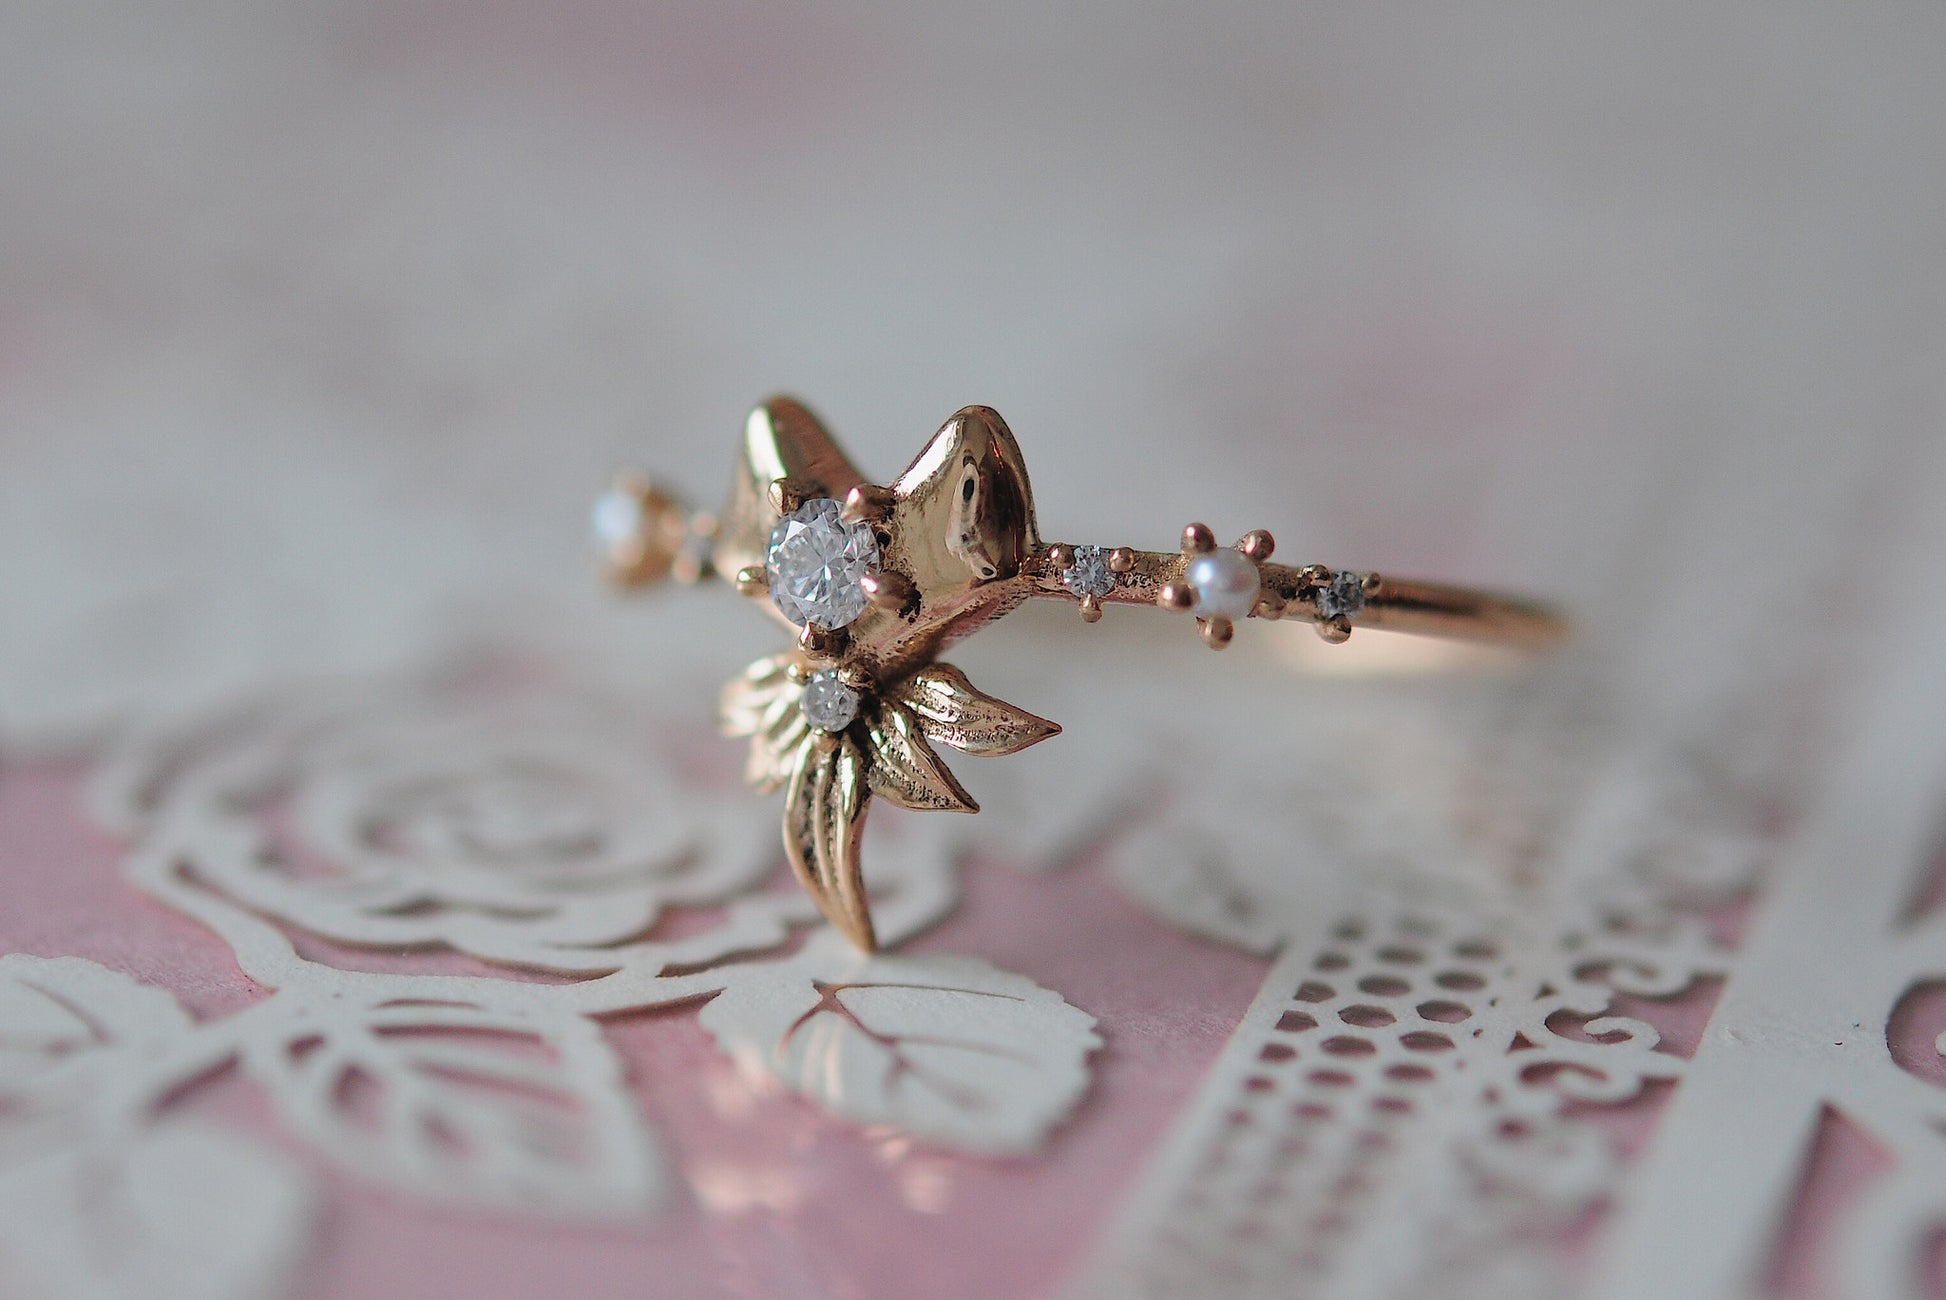 Star Blossom Ring, Pink Gold And Diamonds - Categories